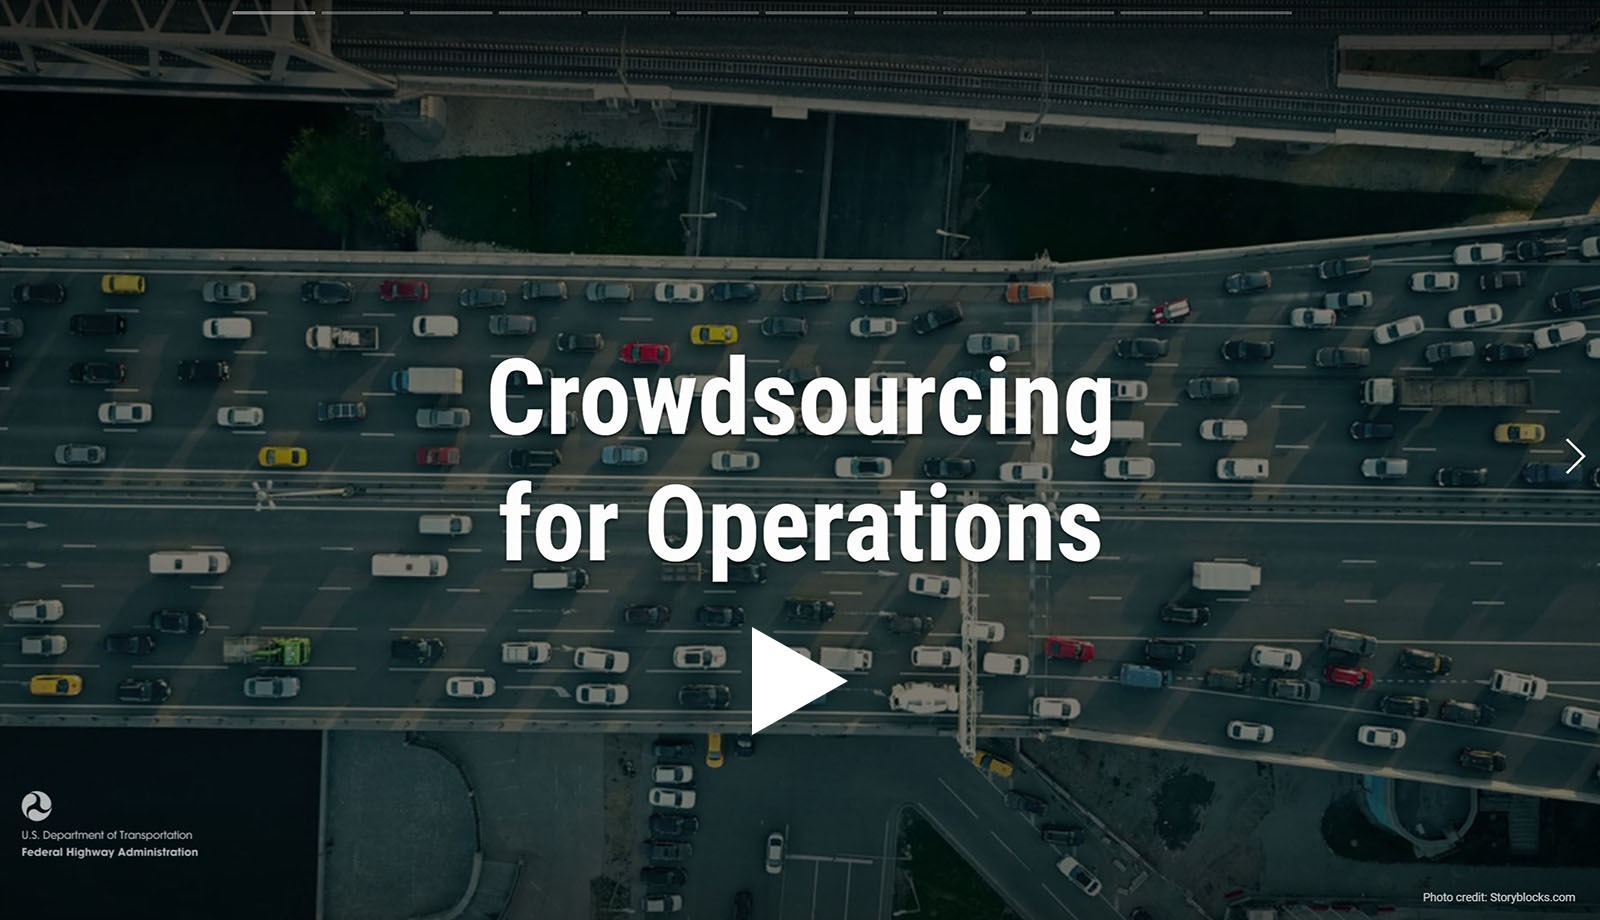 Slideshow: Crowdsourcing for Operations